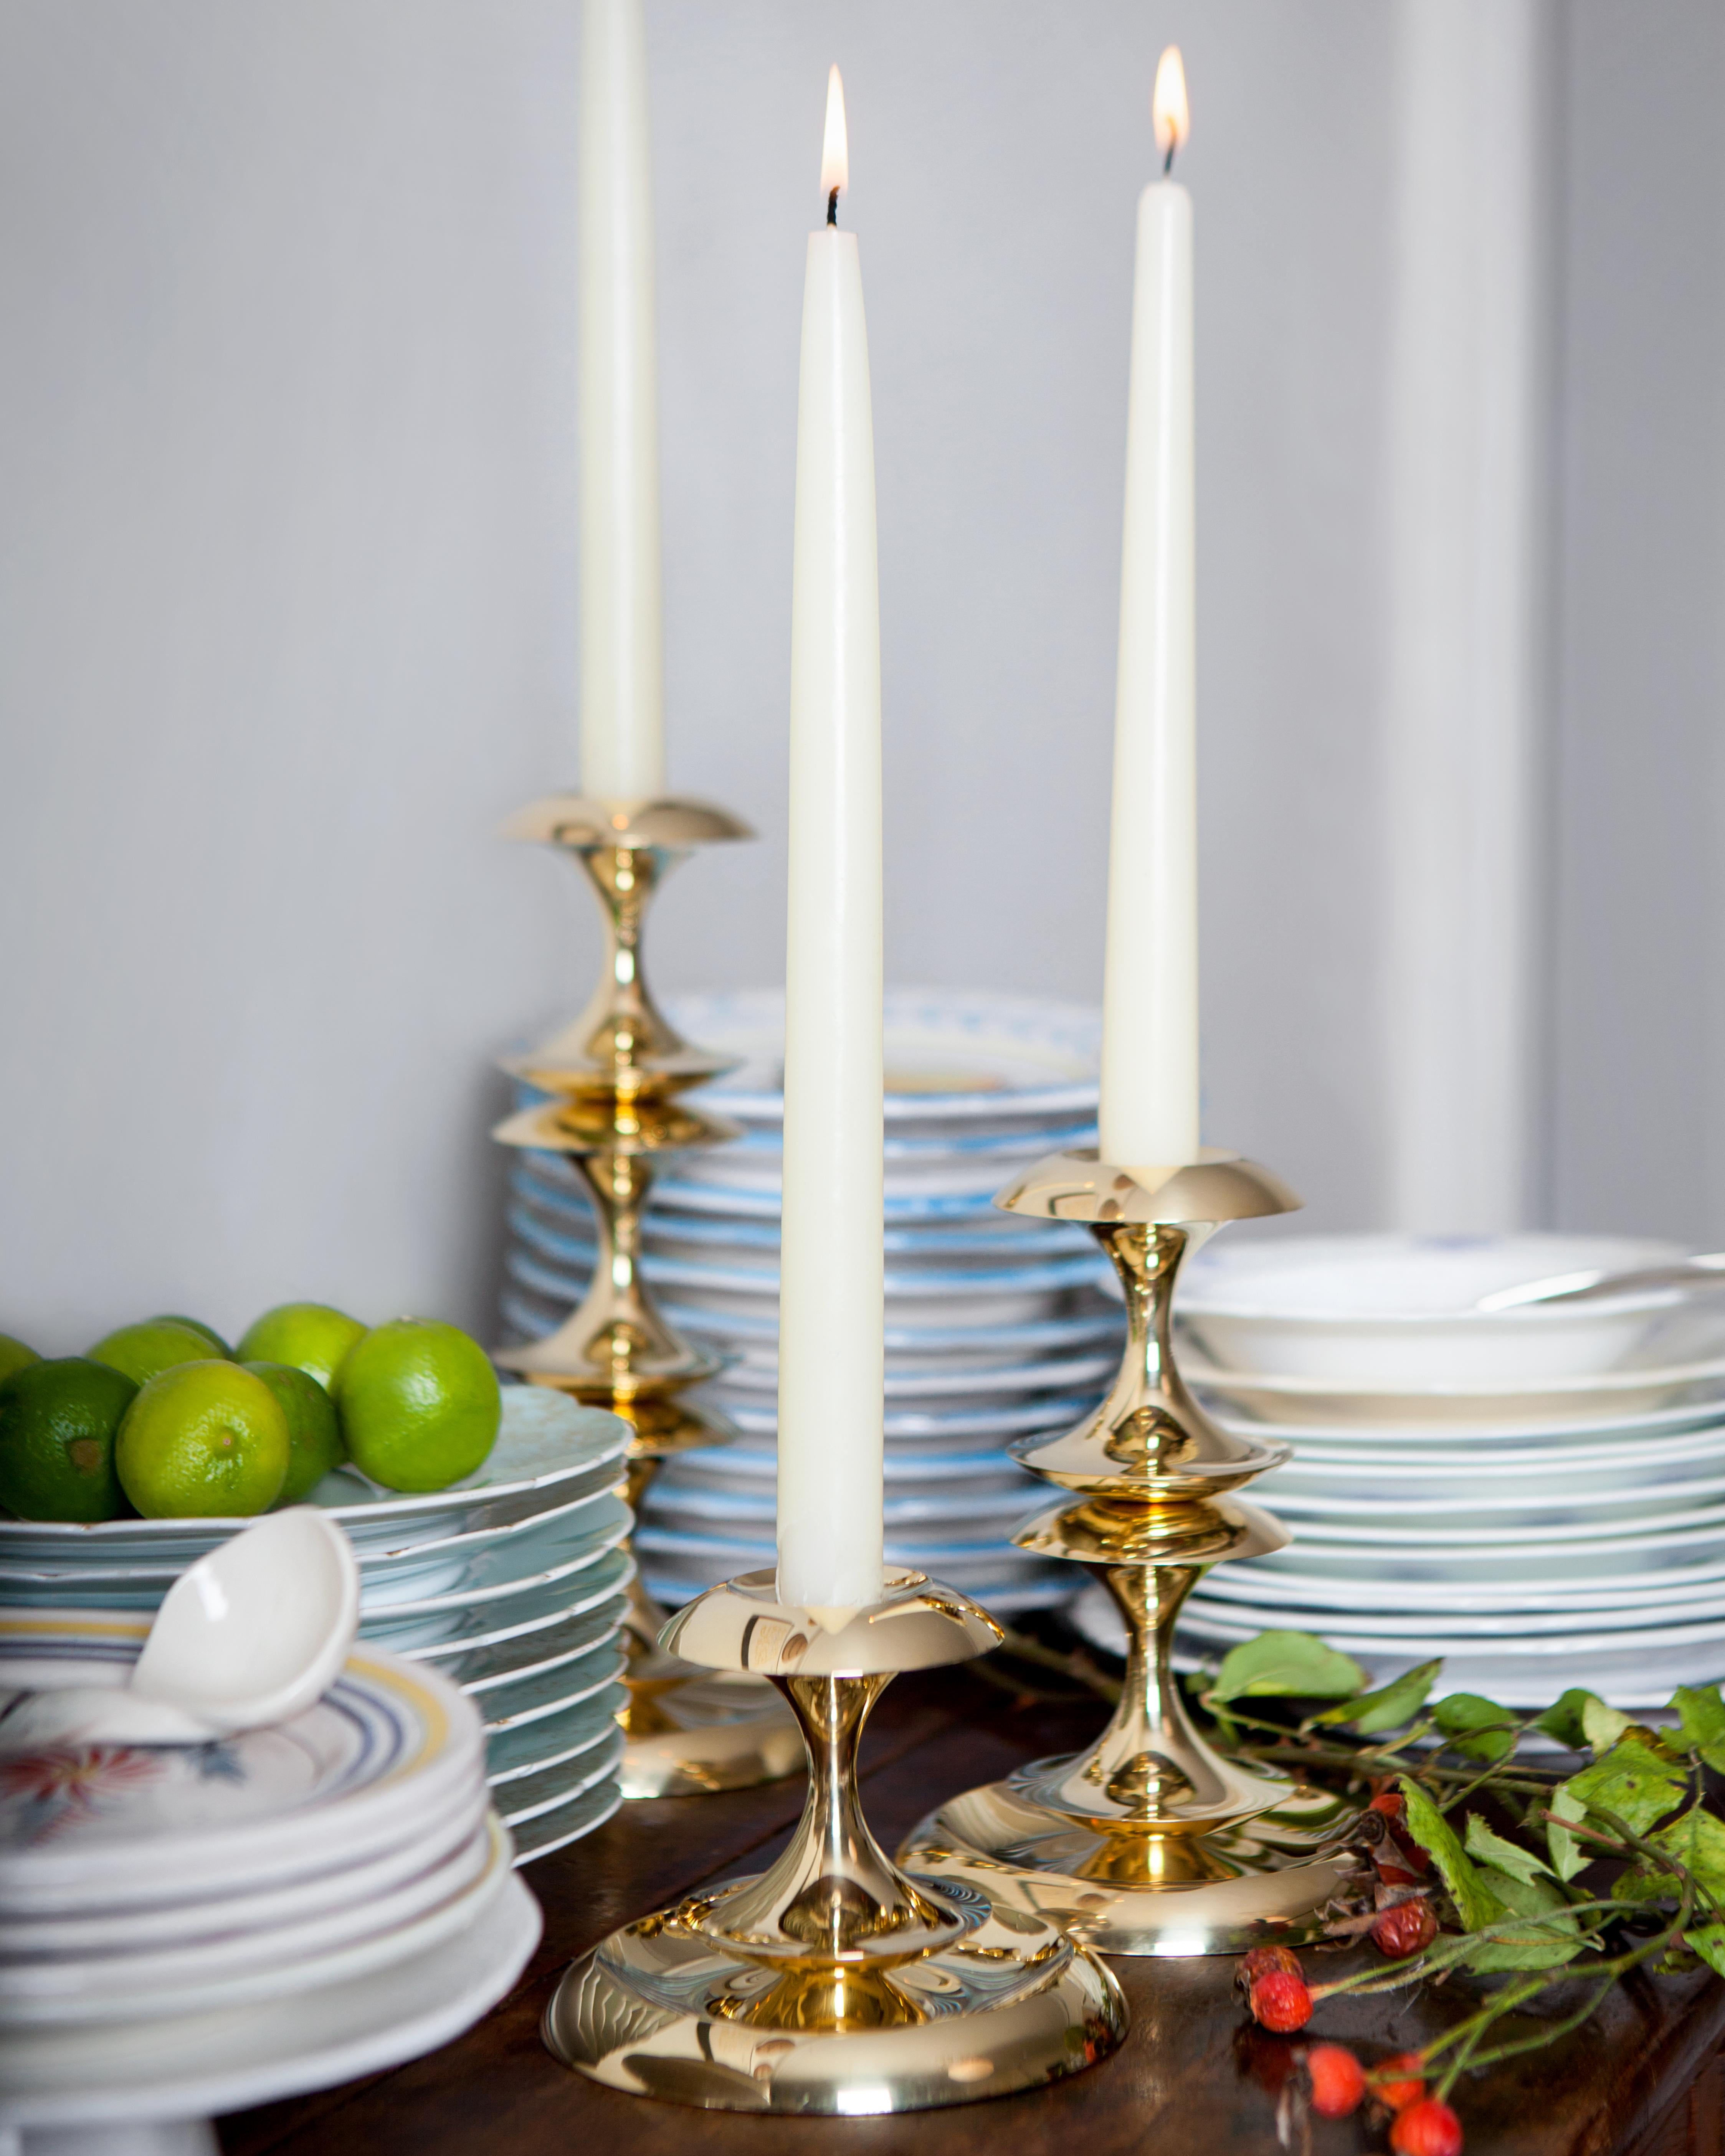 Modern Stayman Candlestick by Remains Lighting Co. in Hand Polished Solid Brass Finish